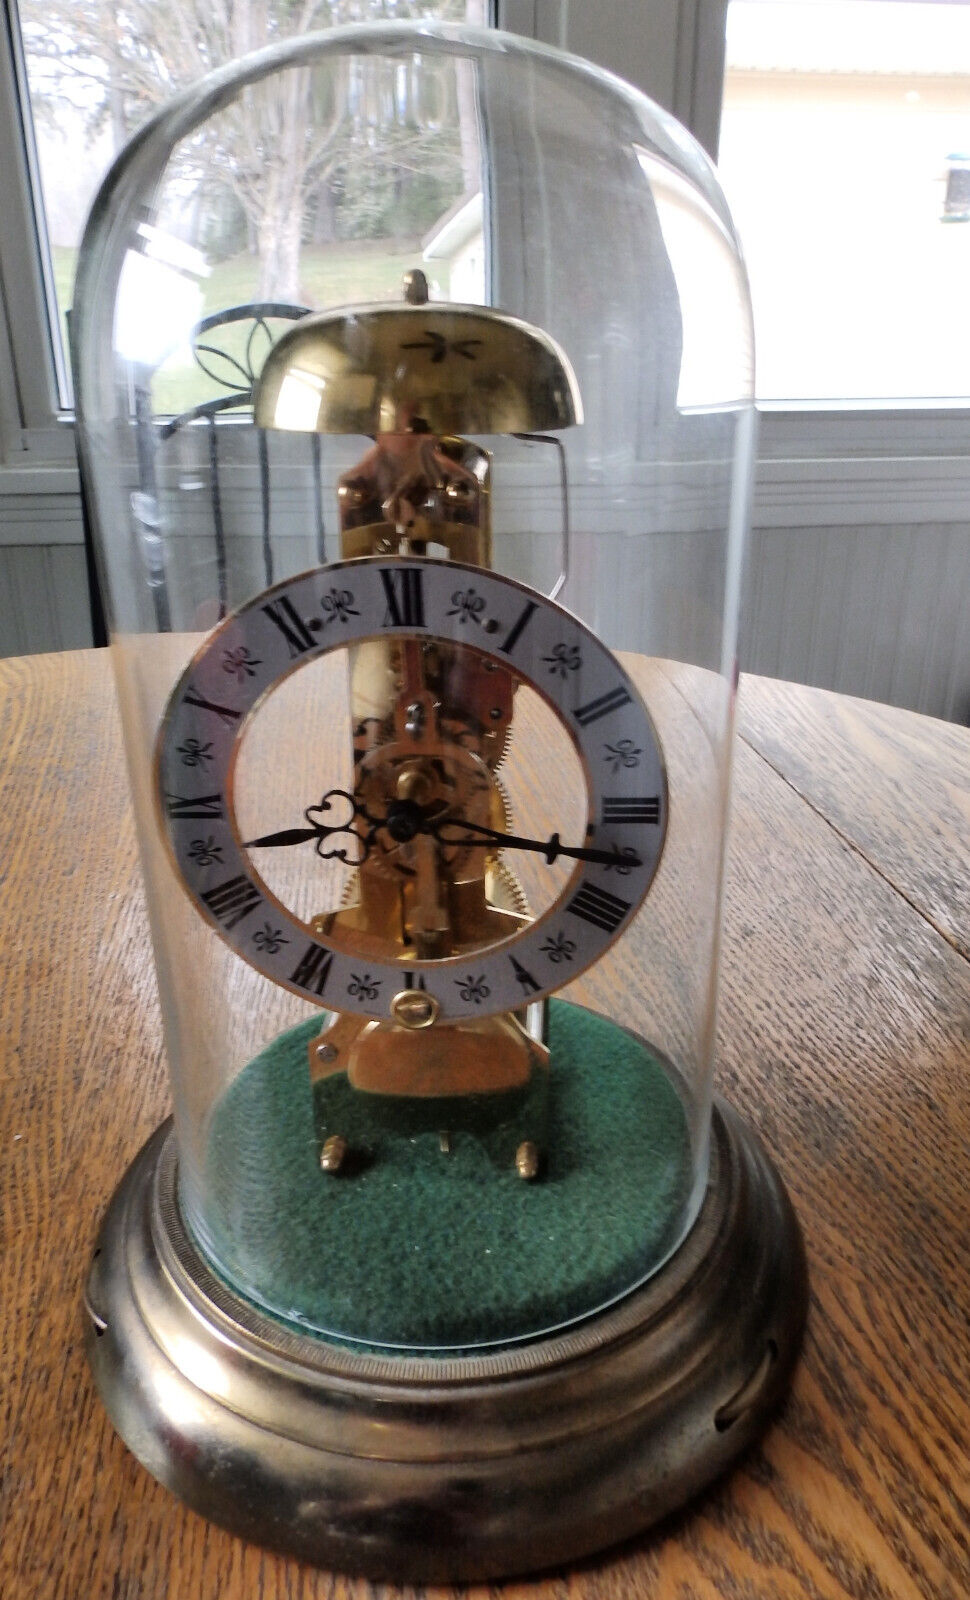 VINTAGE HERMLE SKELETON CLOCK - GLASS DOME - RUNNING - VERY CLEAN